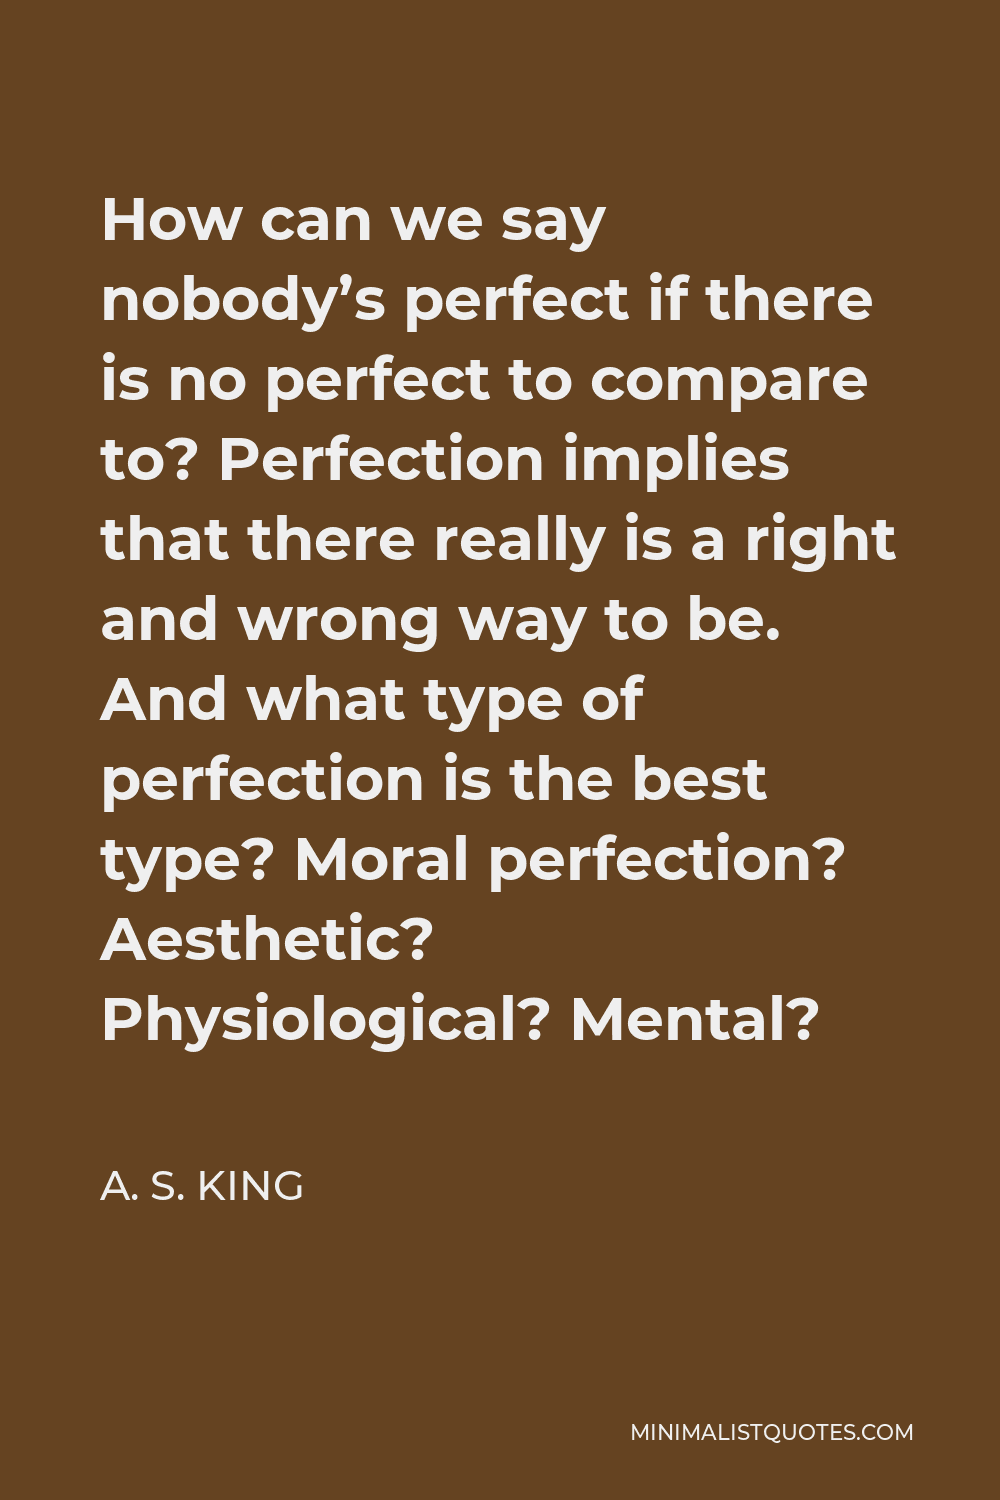 A. S. King Quote - How can we say nobody’s perfect if there is no perfect to compare to? Perfection implies that there really is a right and wrong way to be. And what type of perfection is the best type? Moral perfection? Aesthetic? Physiological? Mental?